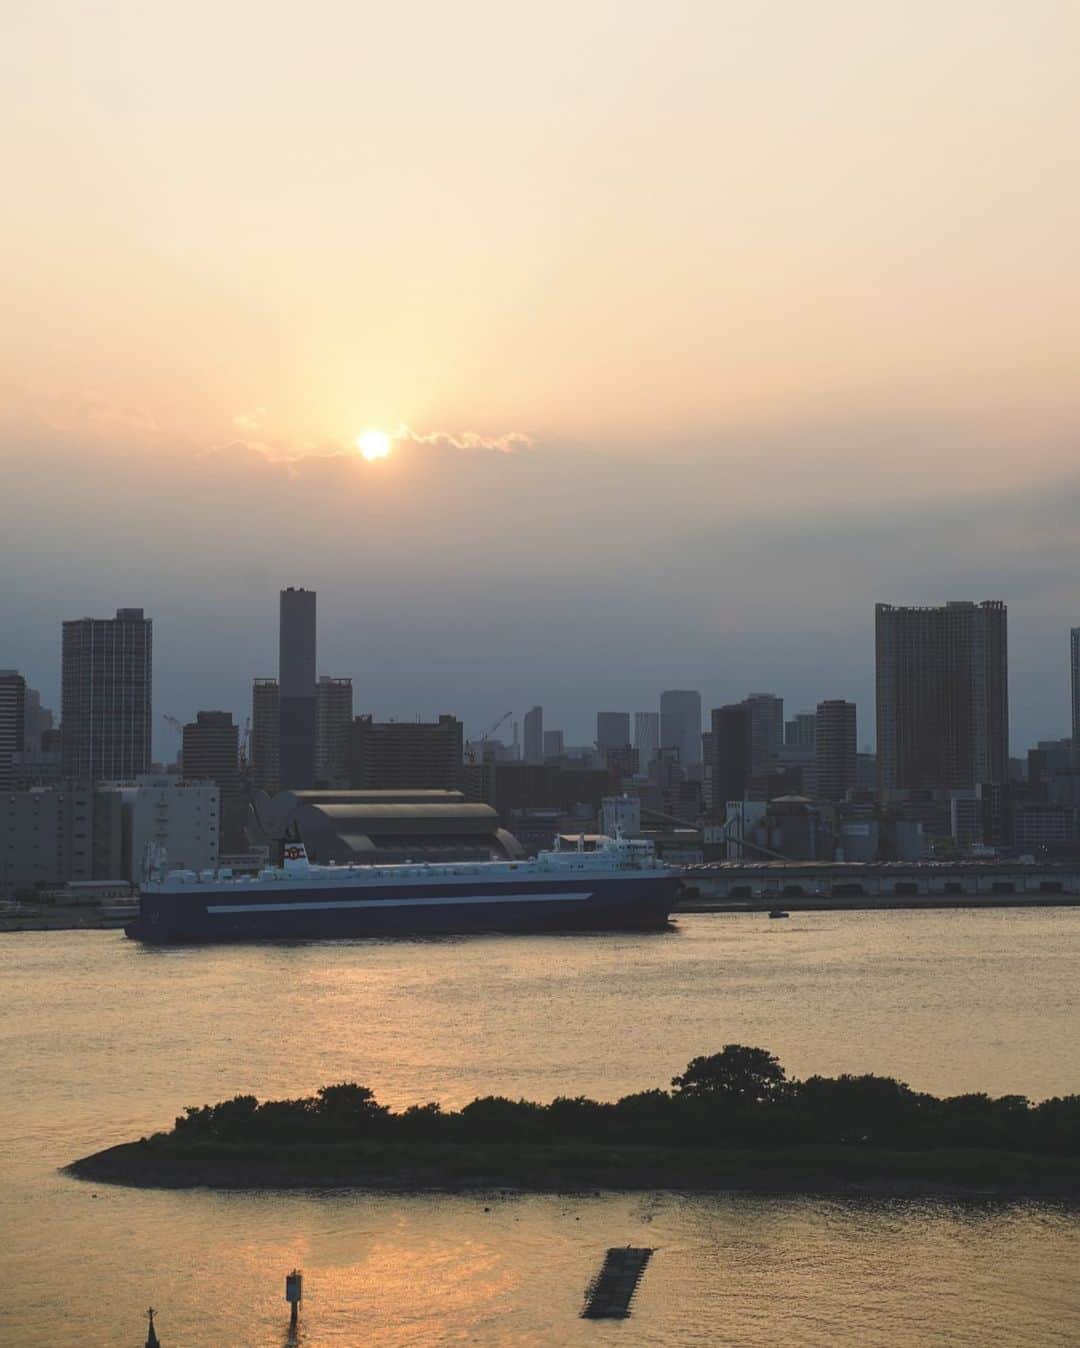 Hilton Tokyo Odaiba ヒルトン東京お台場のインスタグラム：「幻想的な夕日を独り占め 🌅✨  ヒルトン東京お台場の全客室にはバルコニーが設けられており、オレンジ色に輝く夕景をお楽しみいただけます。  夕日に照らされた都会の景色に心癒される、ノスタルジックな黄昏時をご堪能ください。  Indulge in the Enchanting Solitude of a Dreamy Sunset 🌇  At Hilton Tokyo Odaiba, every guest room boasts a private balcony, offering you the perfect vantage point to bask in the resplendent orange hues of the evening sky.  Immerse yourself in the soothing embrace of the cityscape bathed in the sunset's golden glow, and savor the nostalgic beauty of twilight.  #ヒルトン東京お台場 #hiltontokyoodaiba」